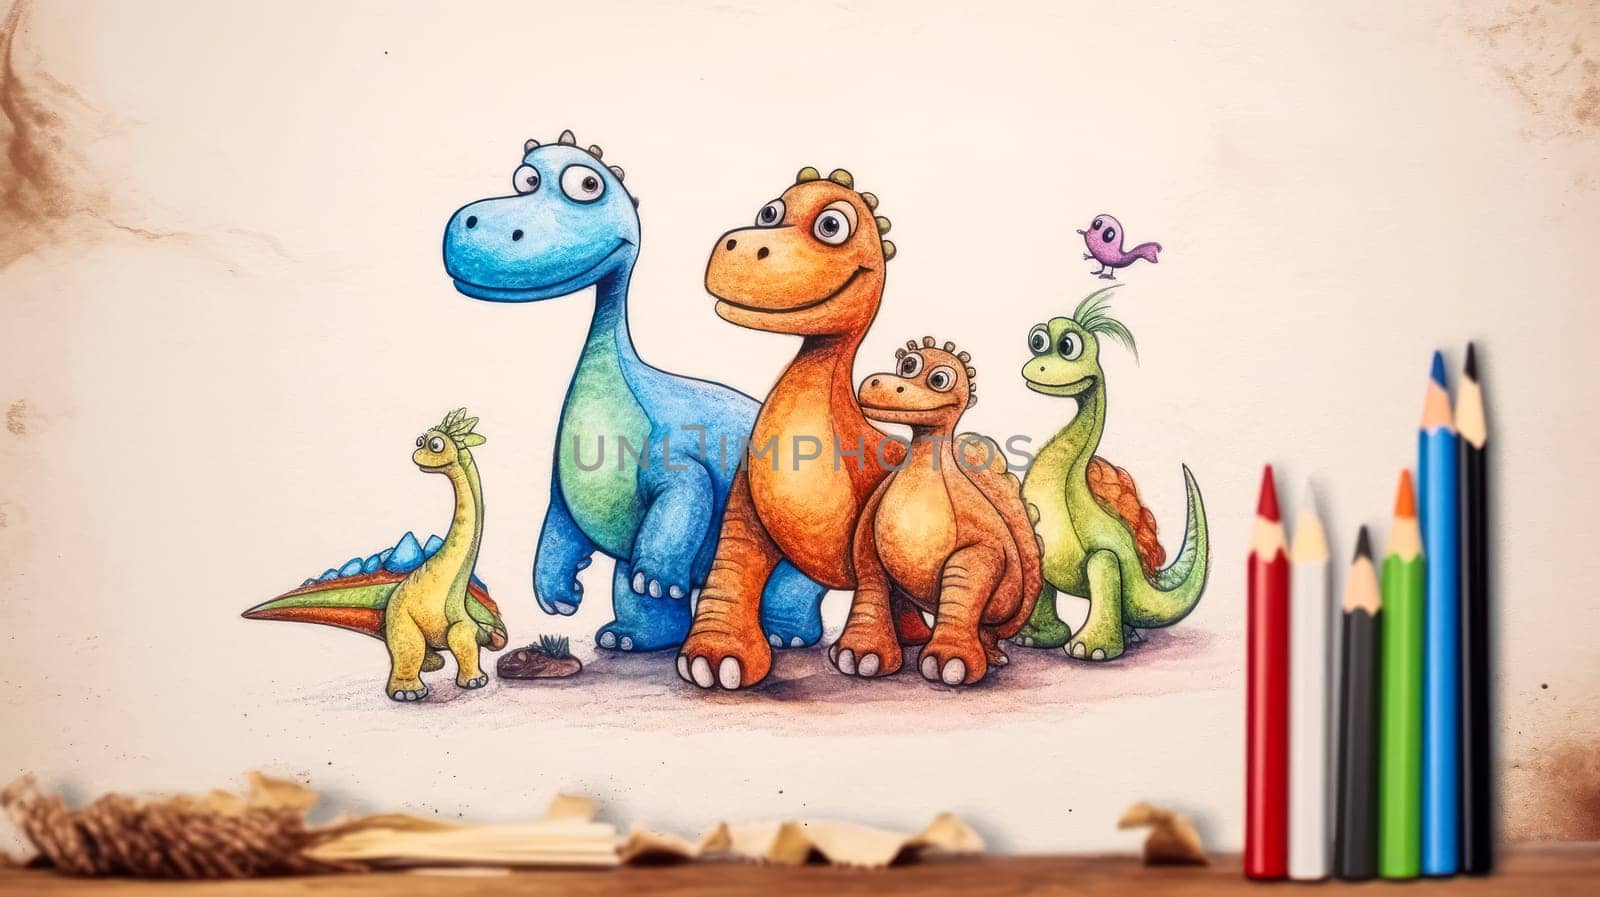 A delightful childrens pencil drawing depicts playful dinosaurs and kids having a blast together, igniting imagination and wonder in a whimsical storybook scene.